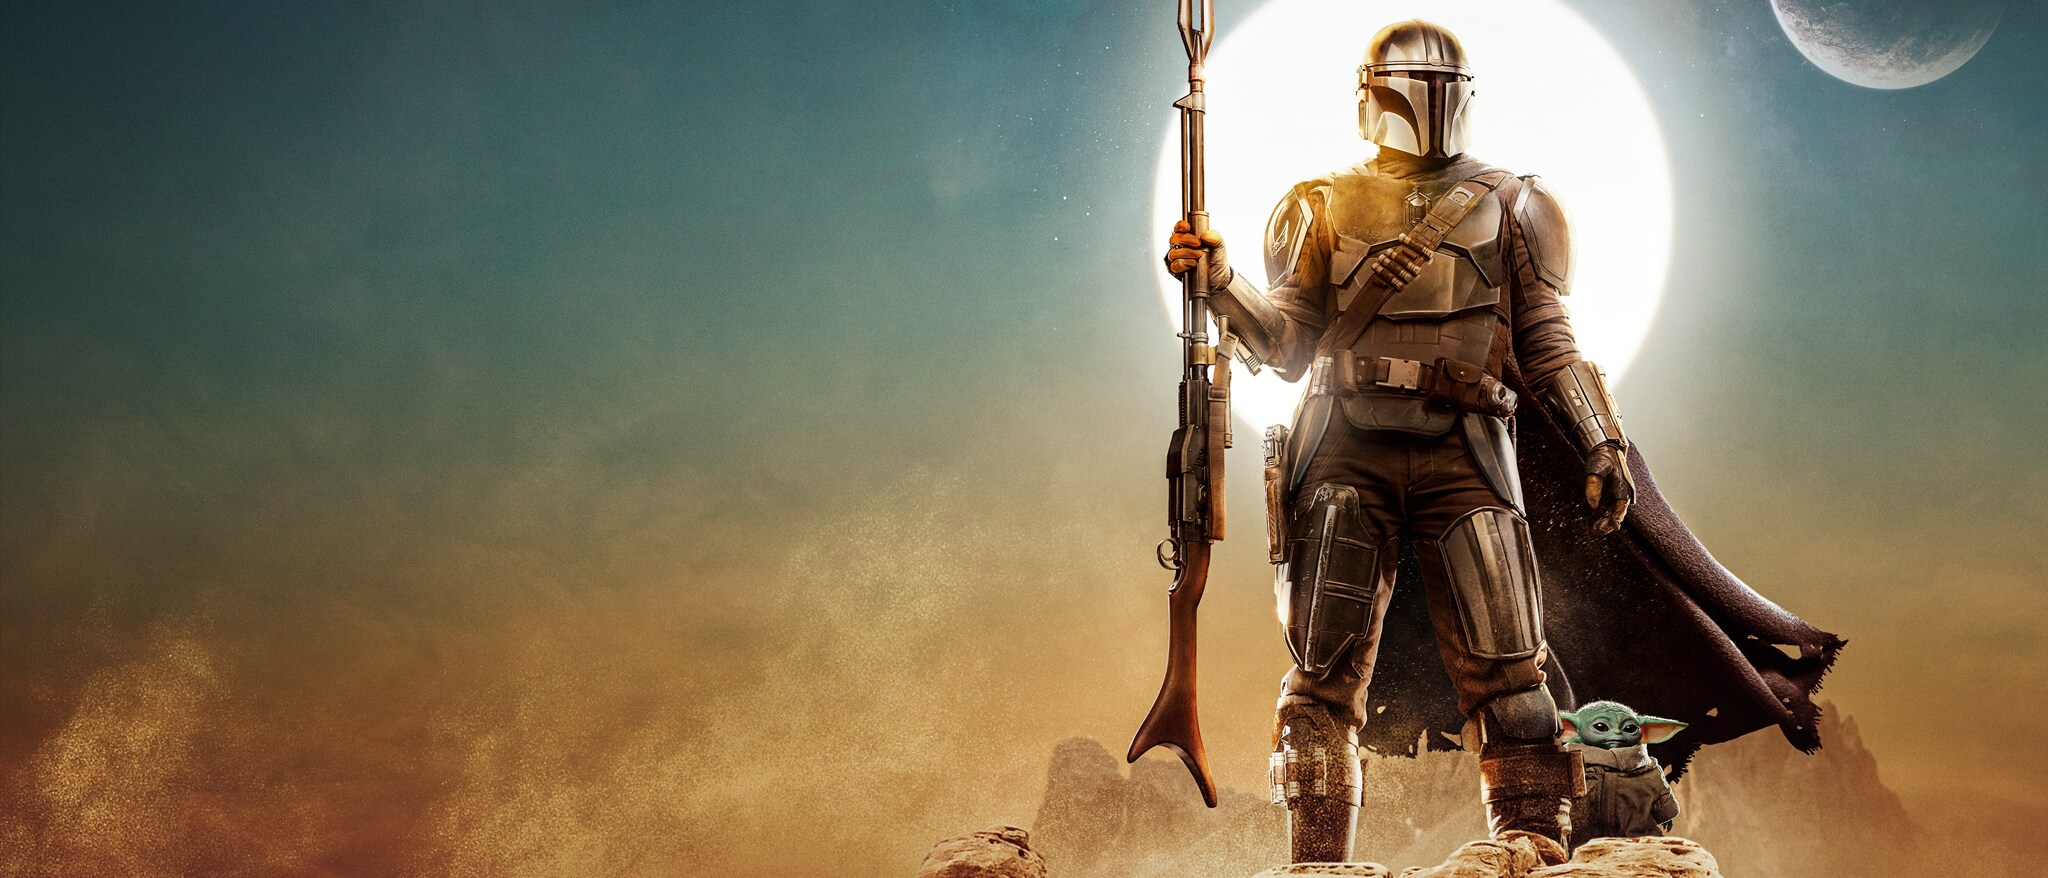 Star Wars: The Mandalorian (Season Two) - Featured Content Banner